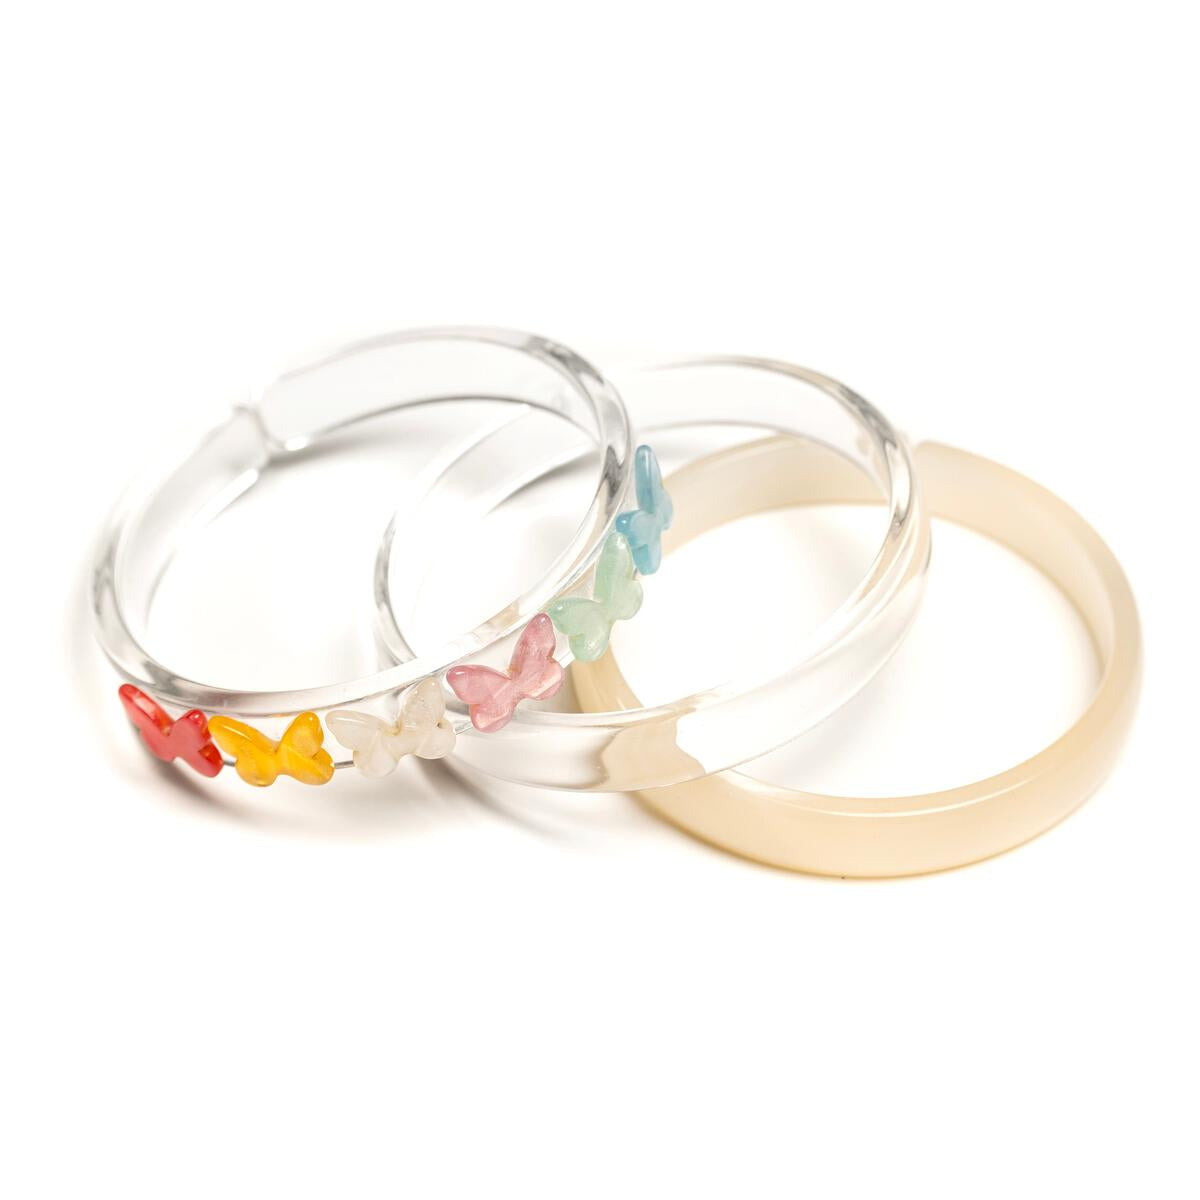 Pastel Butterfly Acrylic Bangle Bracelets by Lilies & Roses